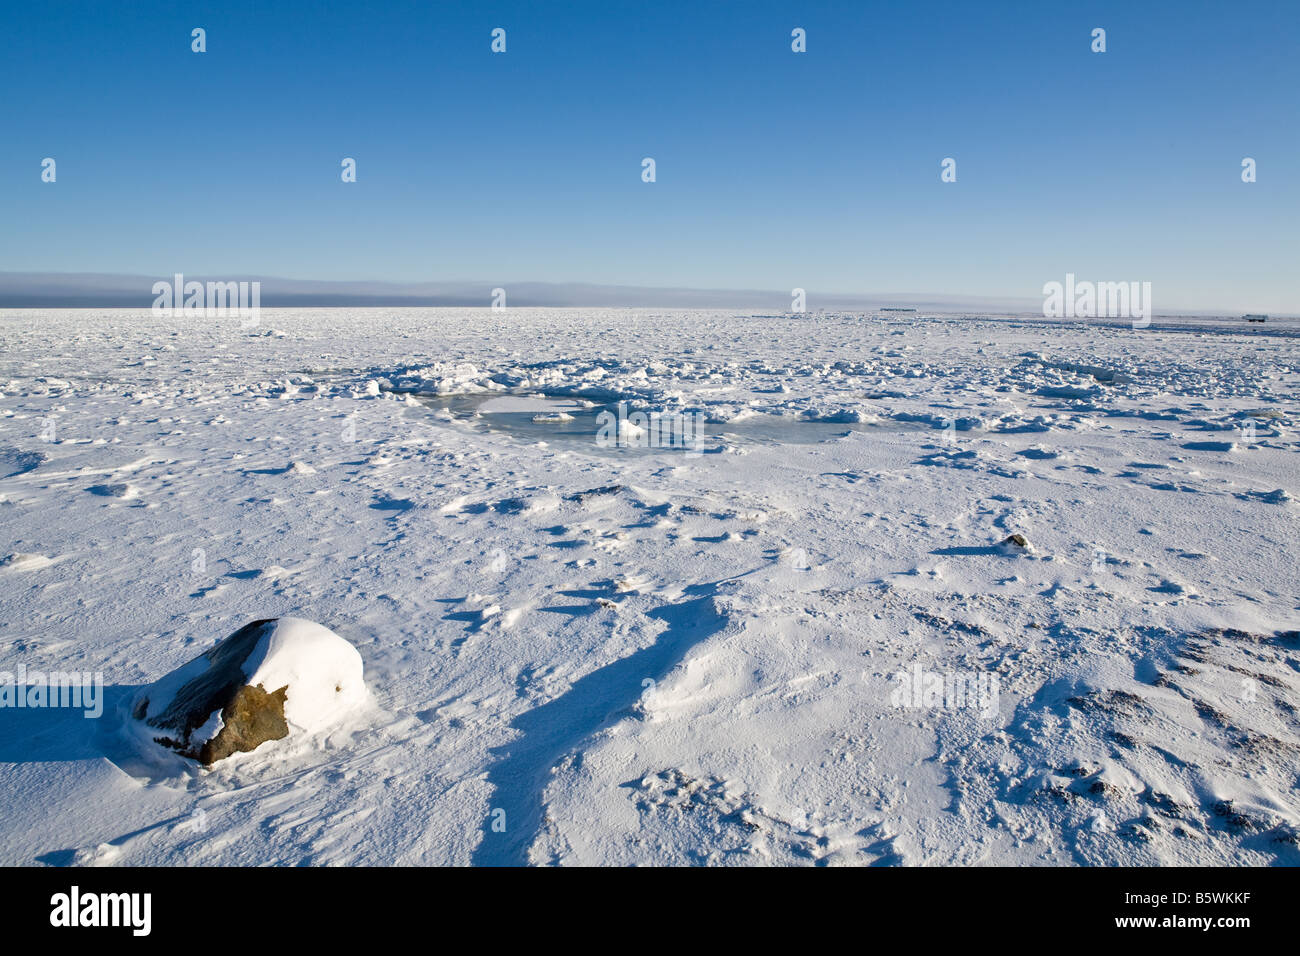 Snow swept view of a frozen Hudson Bay from the shores of Wapusk National Park, Manitoba, Canada Stock Photo